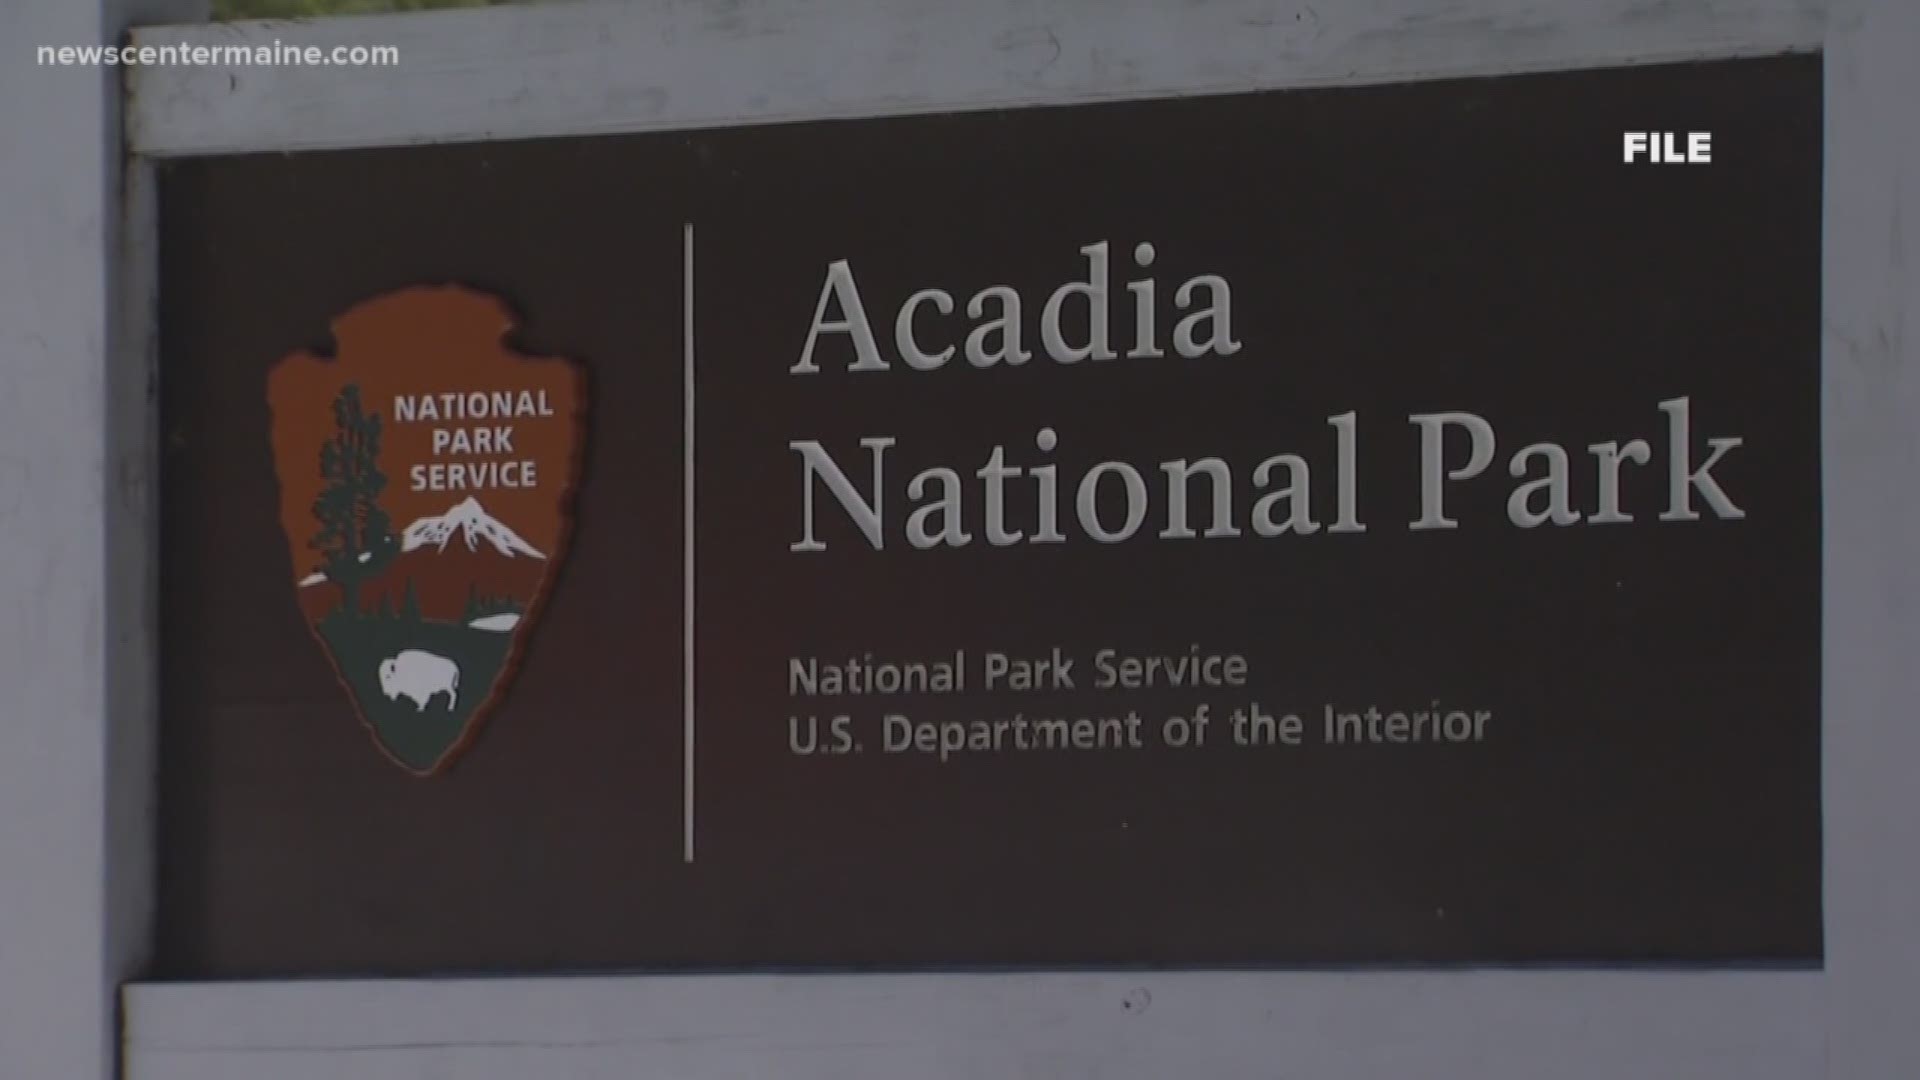 Acadia National Park is breaking visitor records this year but unfortunately, there are not enough places for them to park and it's causing big problems.